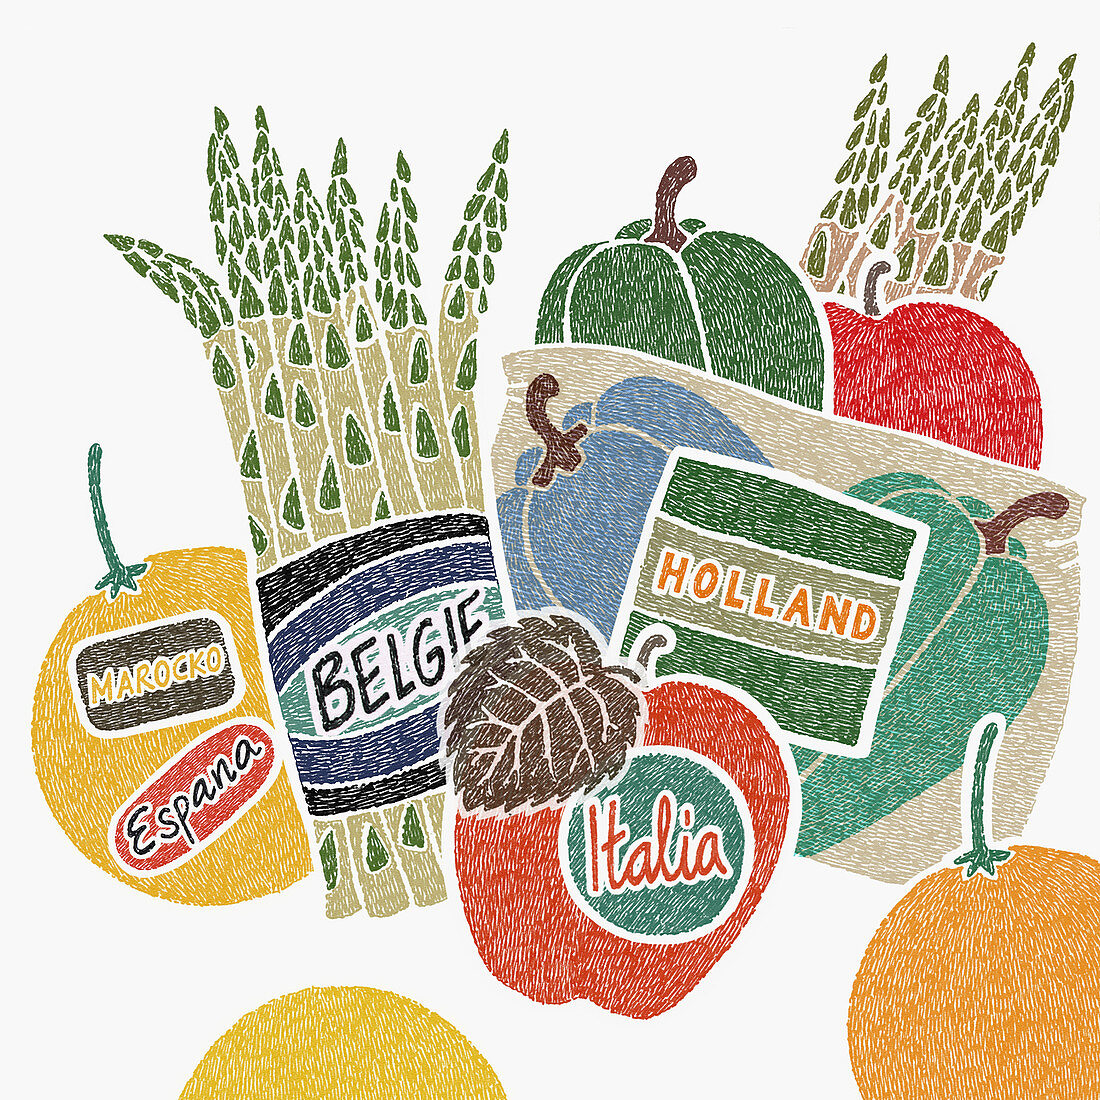 Food labels with country of origin, illustration